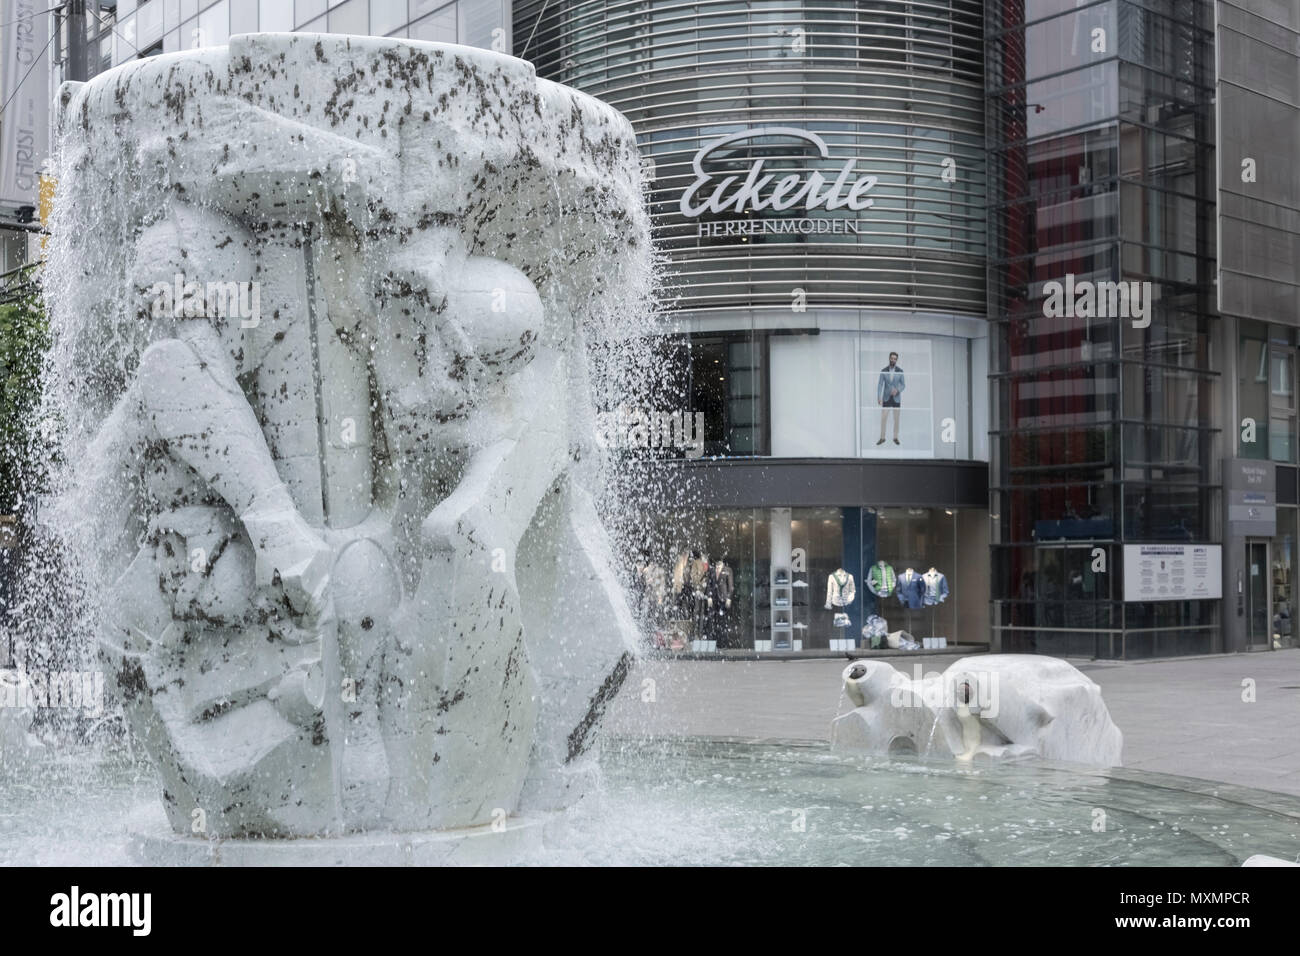 Brockhaus fountain and sculpture in city shopping centre, Zeil Street, Frankfurt am Main, Hesse, Germany Stock Photo